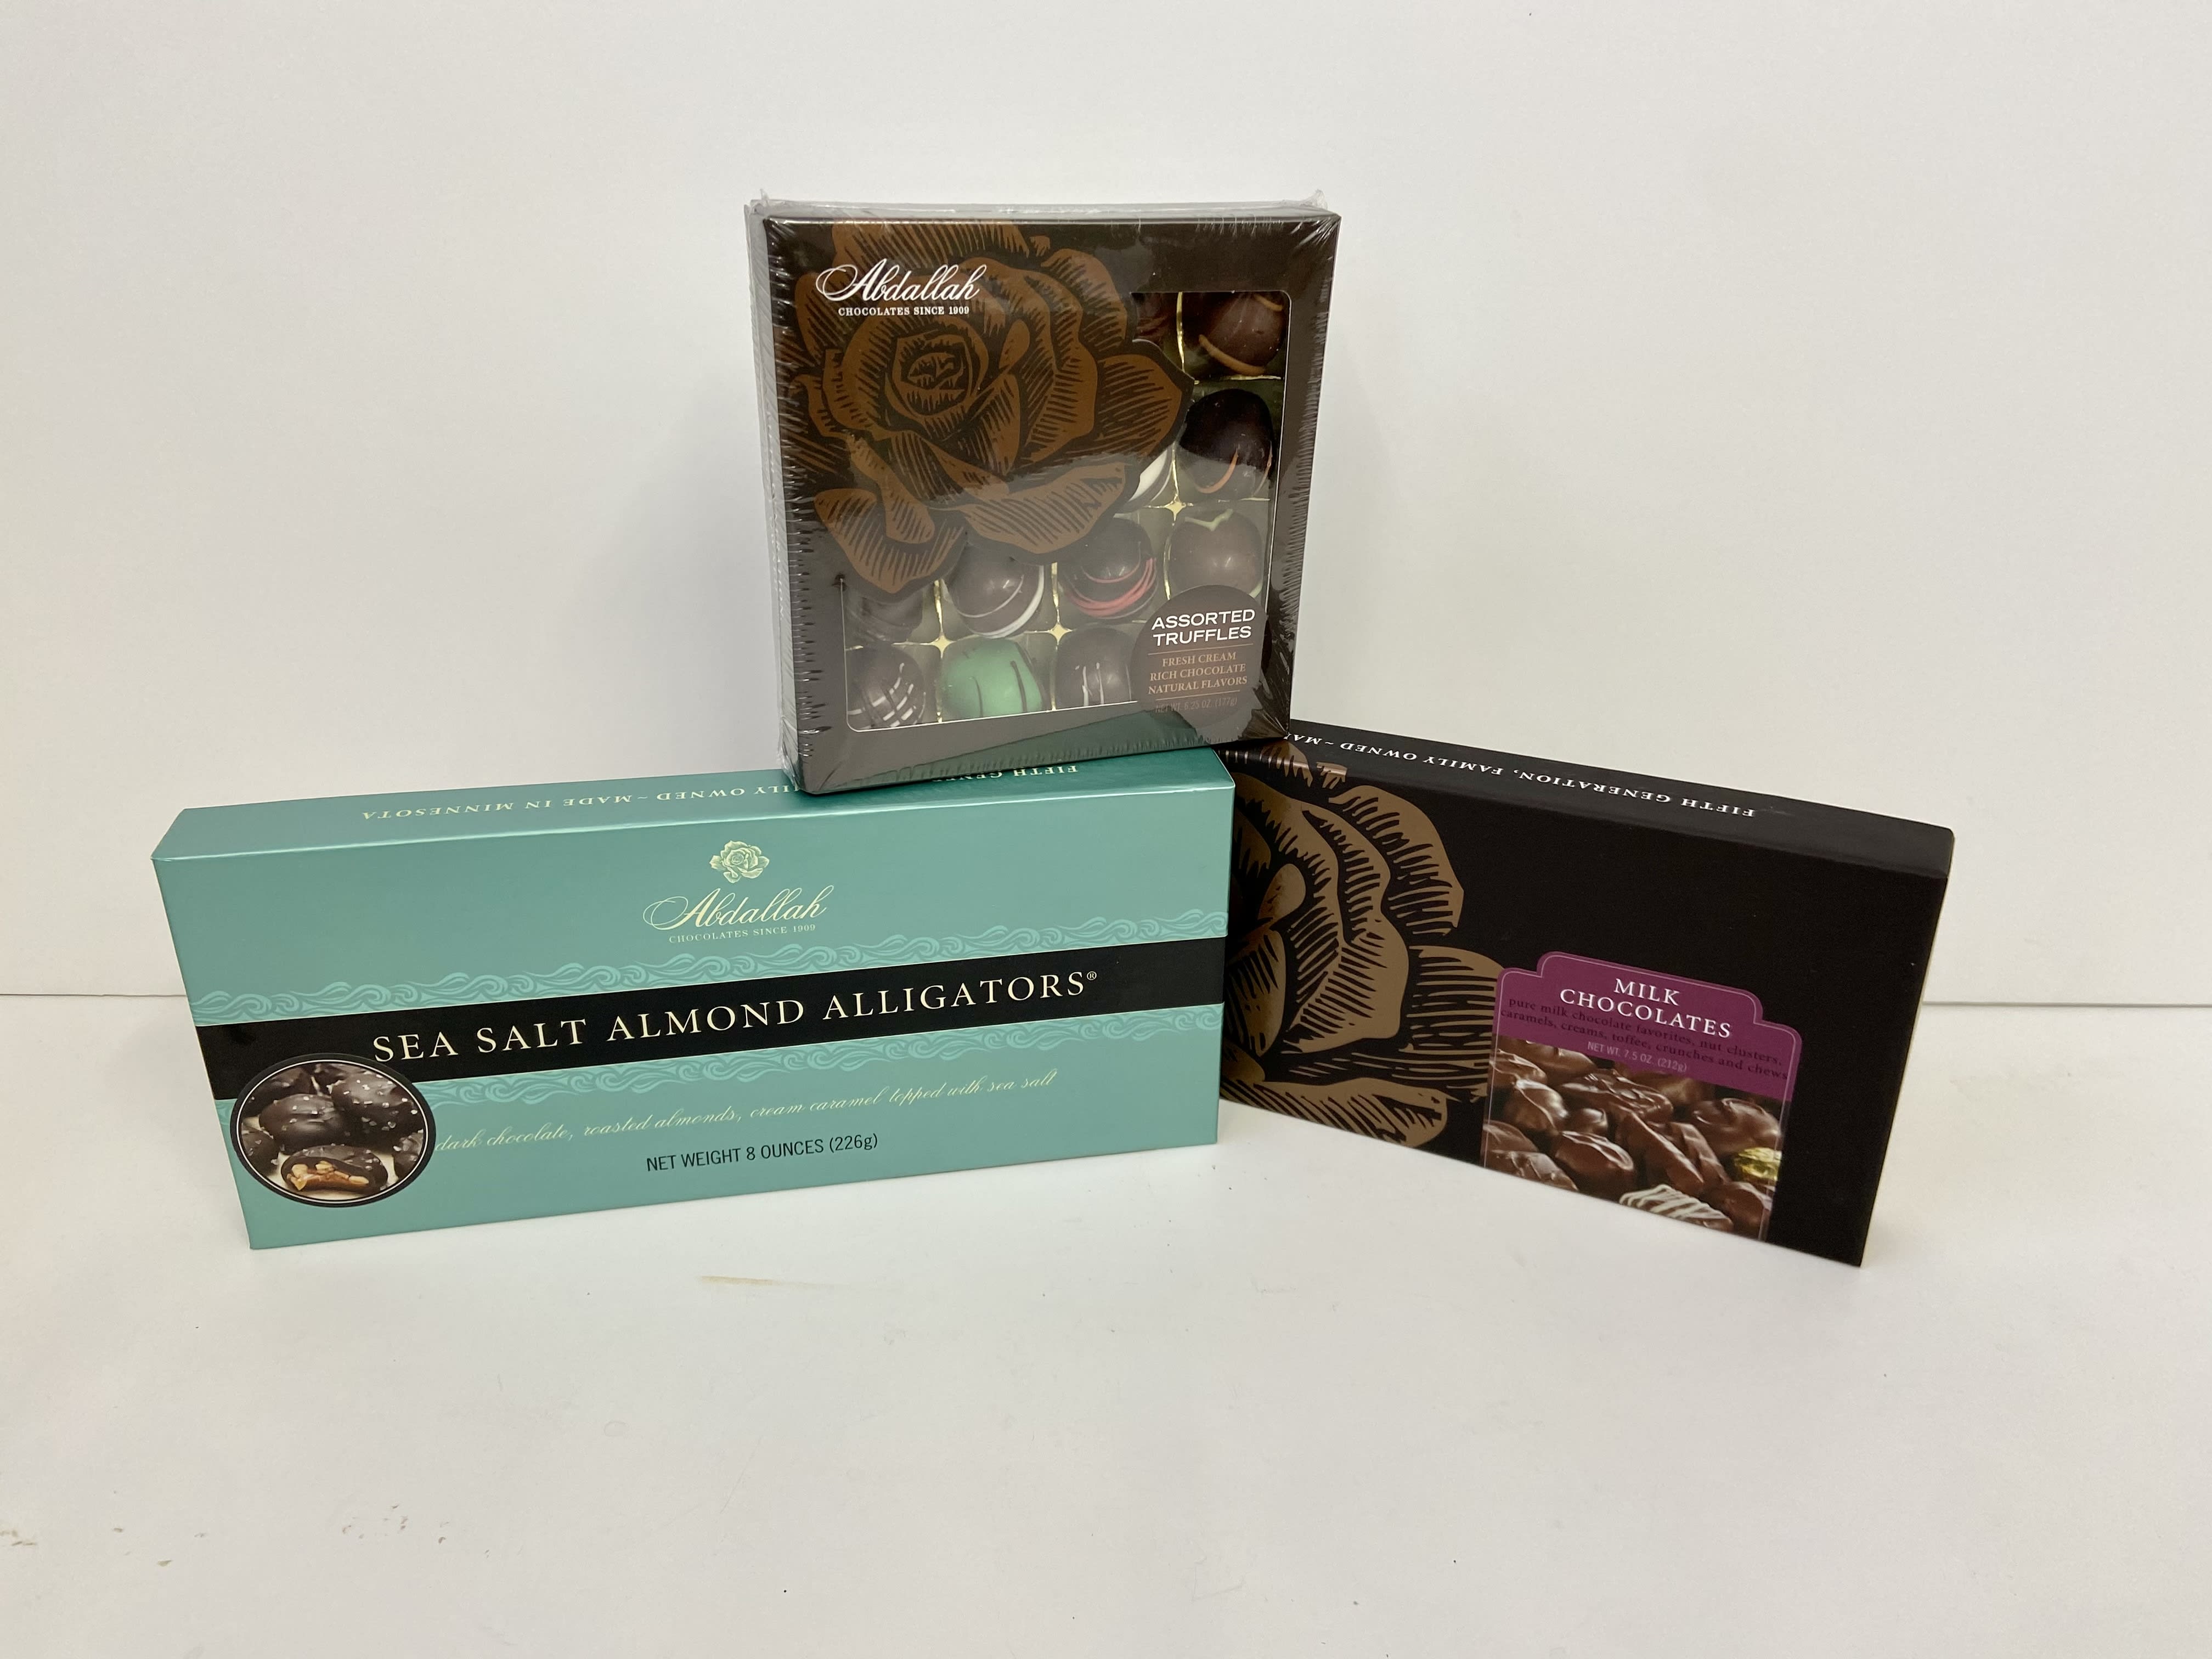 Abdallah chocolates -  triple chocolate banquet assortment-$19.99 and alligator caramels and assorted truffles 12.99  